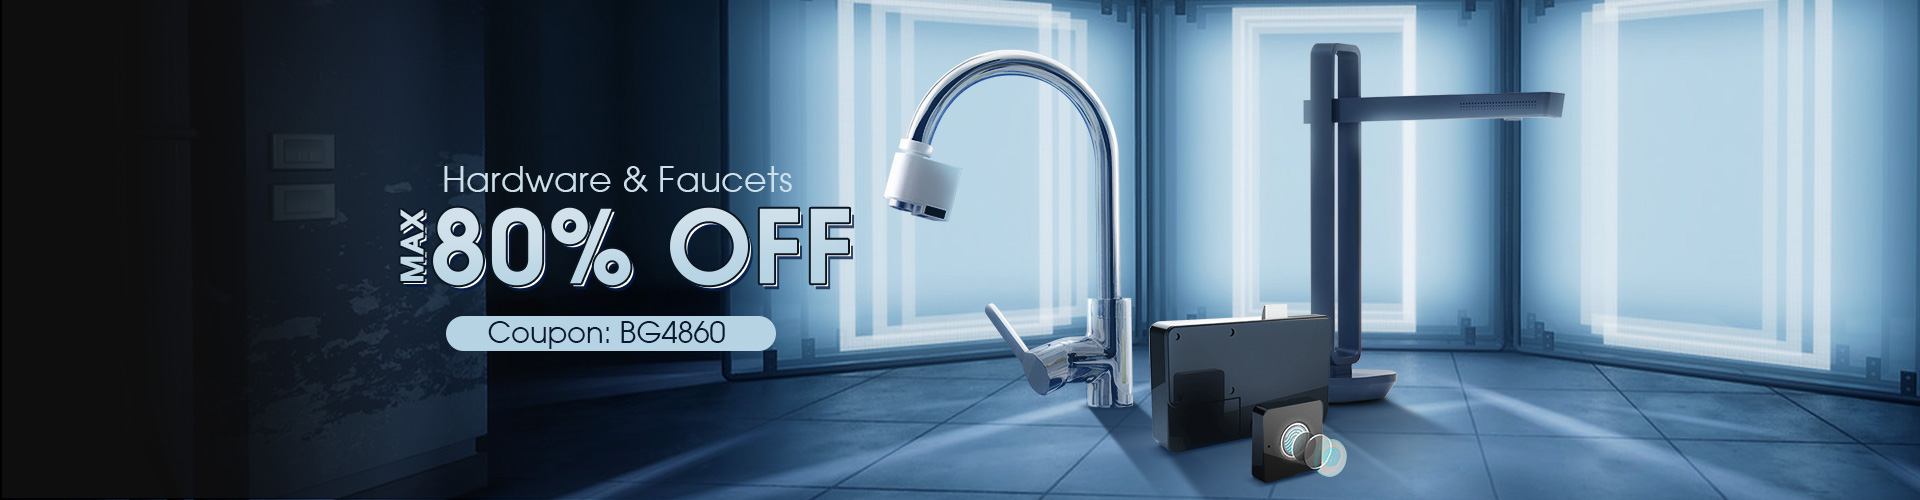 15% OFF for Faucet Hardware Promotion